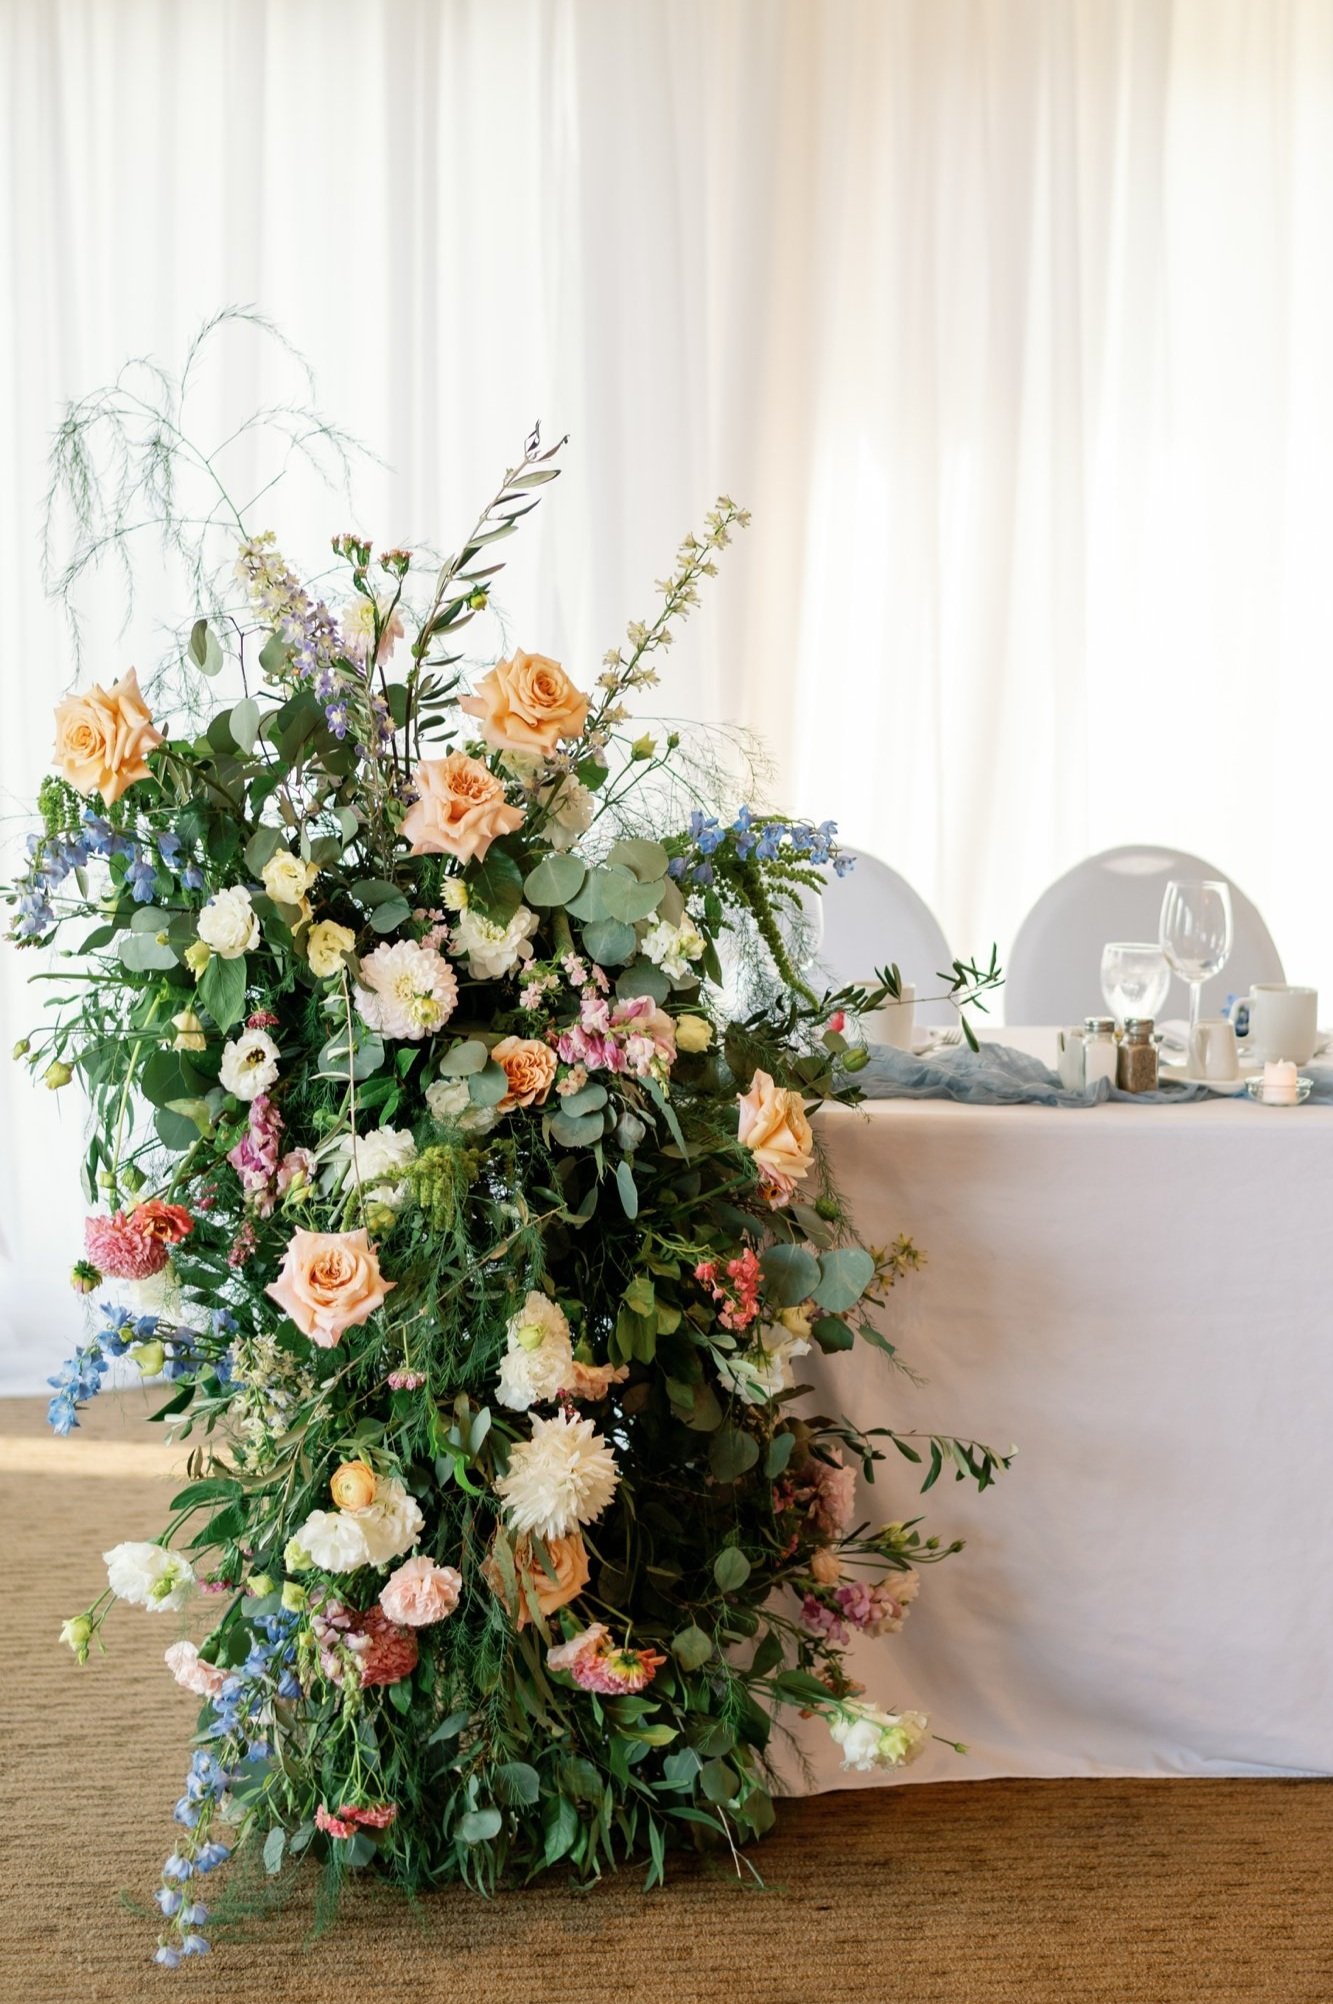 Floral pillar with peach roses, white dahlias, and blue delphinium next to a wedding head table